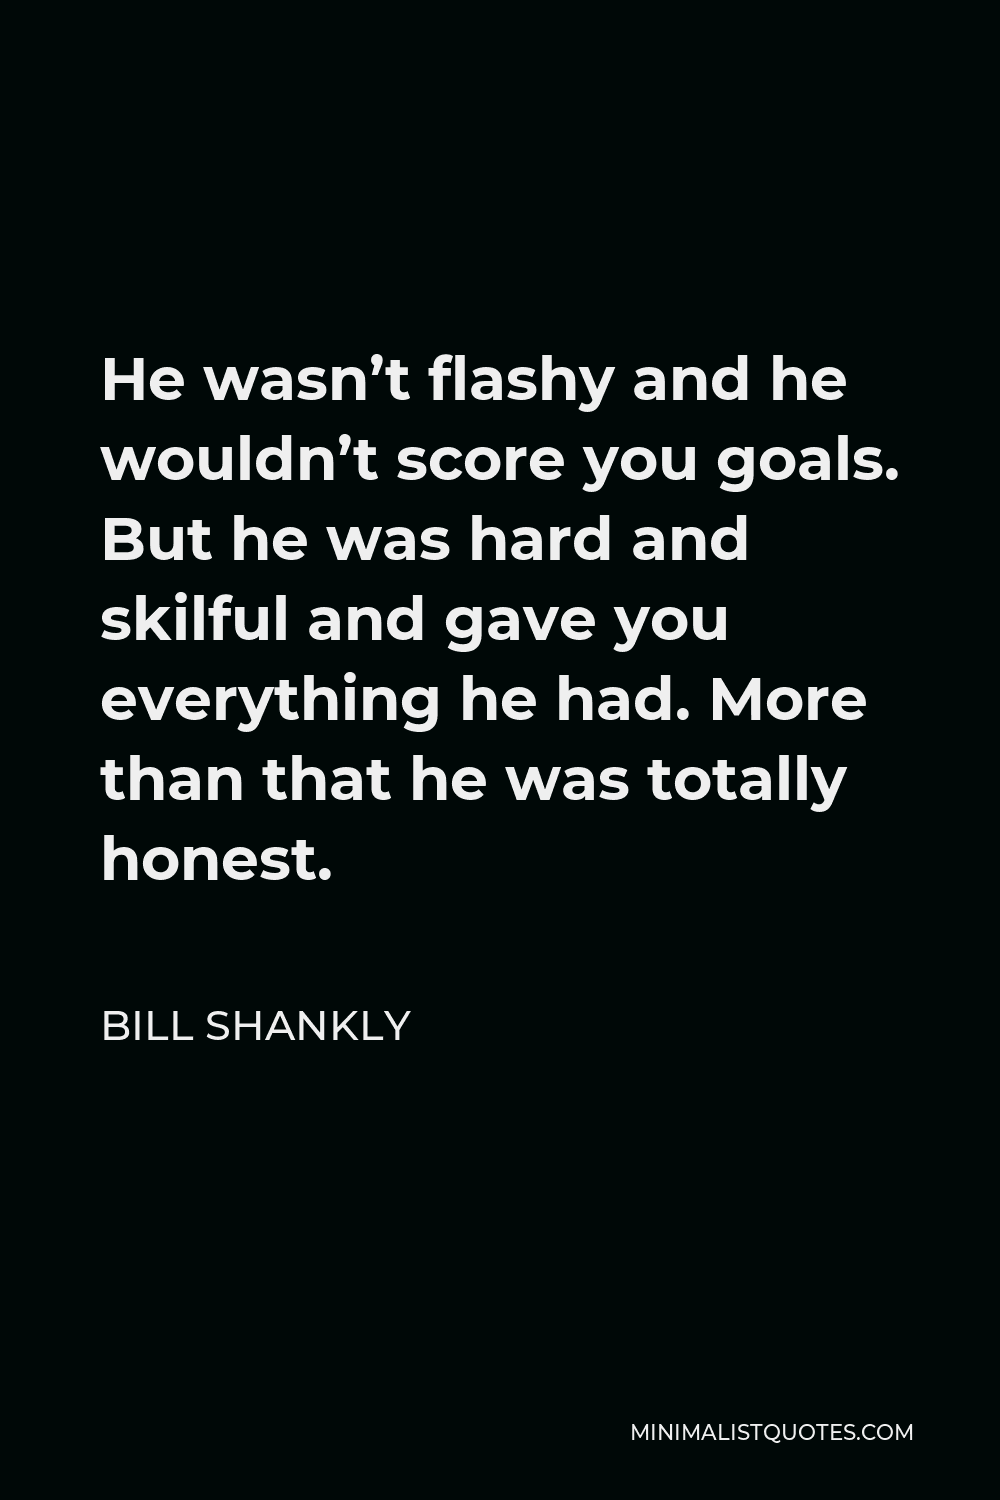 Bill Shankly Quote - He wasn’t flashy and he wouldn’t score you goals. But he was hard and skilful and gave you everything he had. More than that he was totally honest.